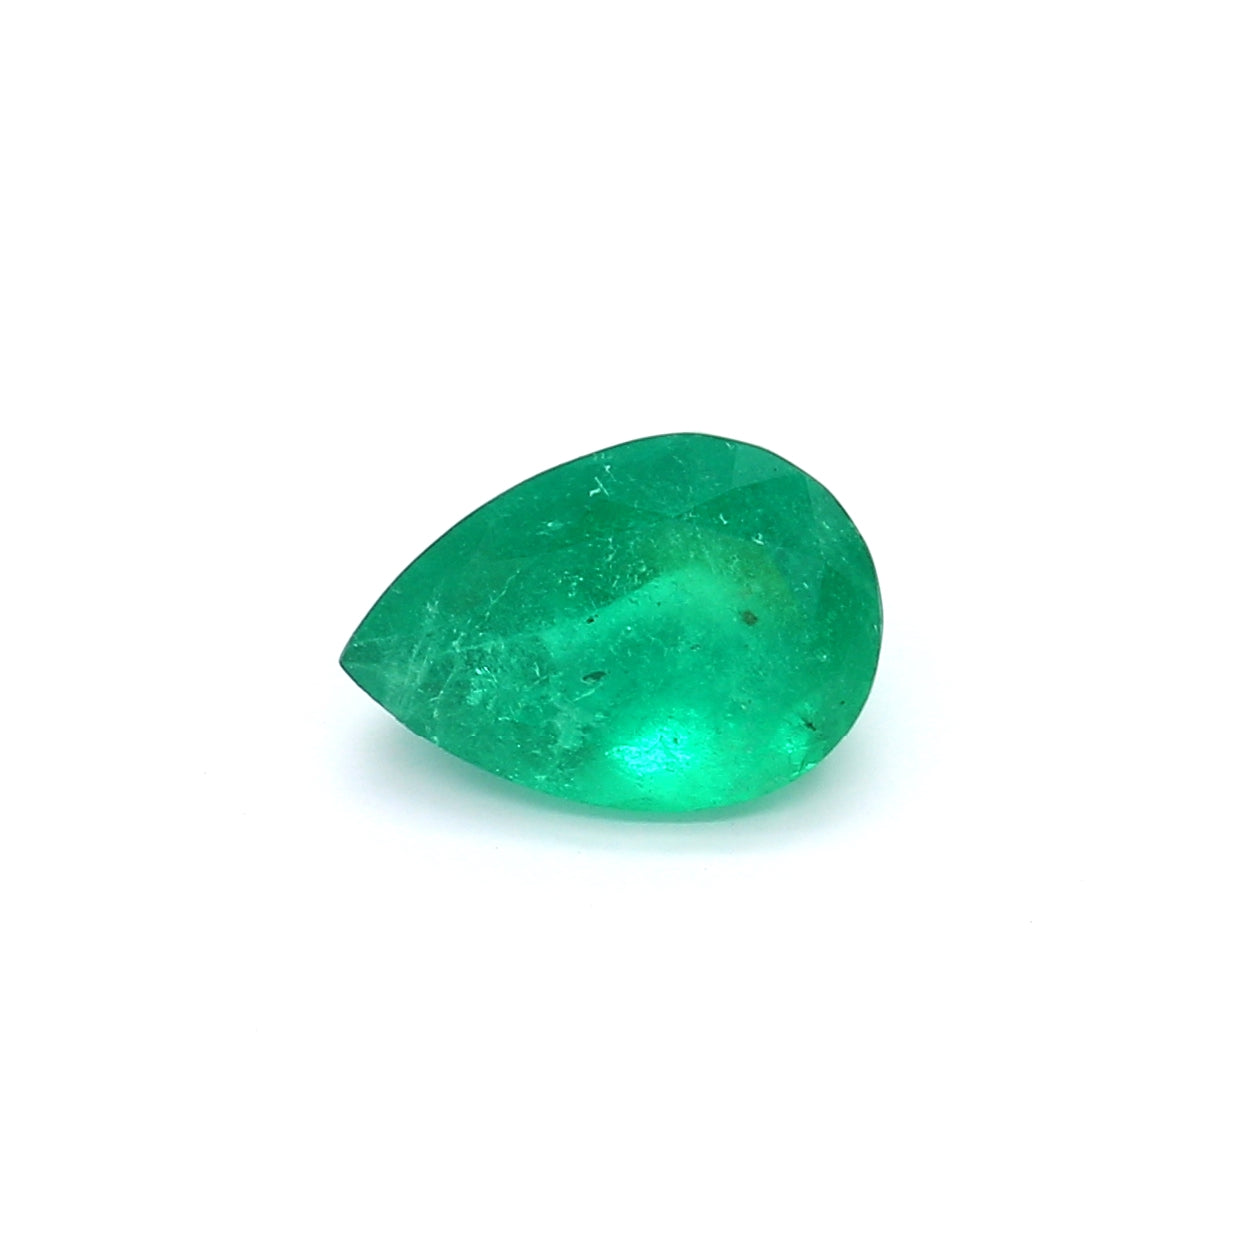 1.73ct Pear Shape Emerald, Moderate Oil, Colombia - 9.60 x 6.86 x 5.14mm